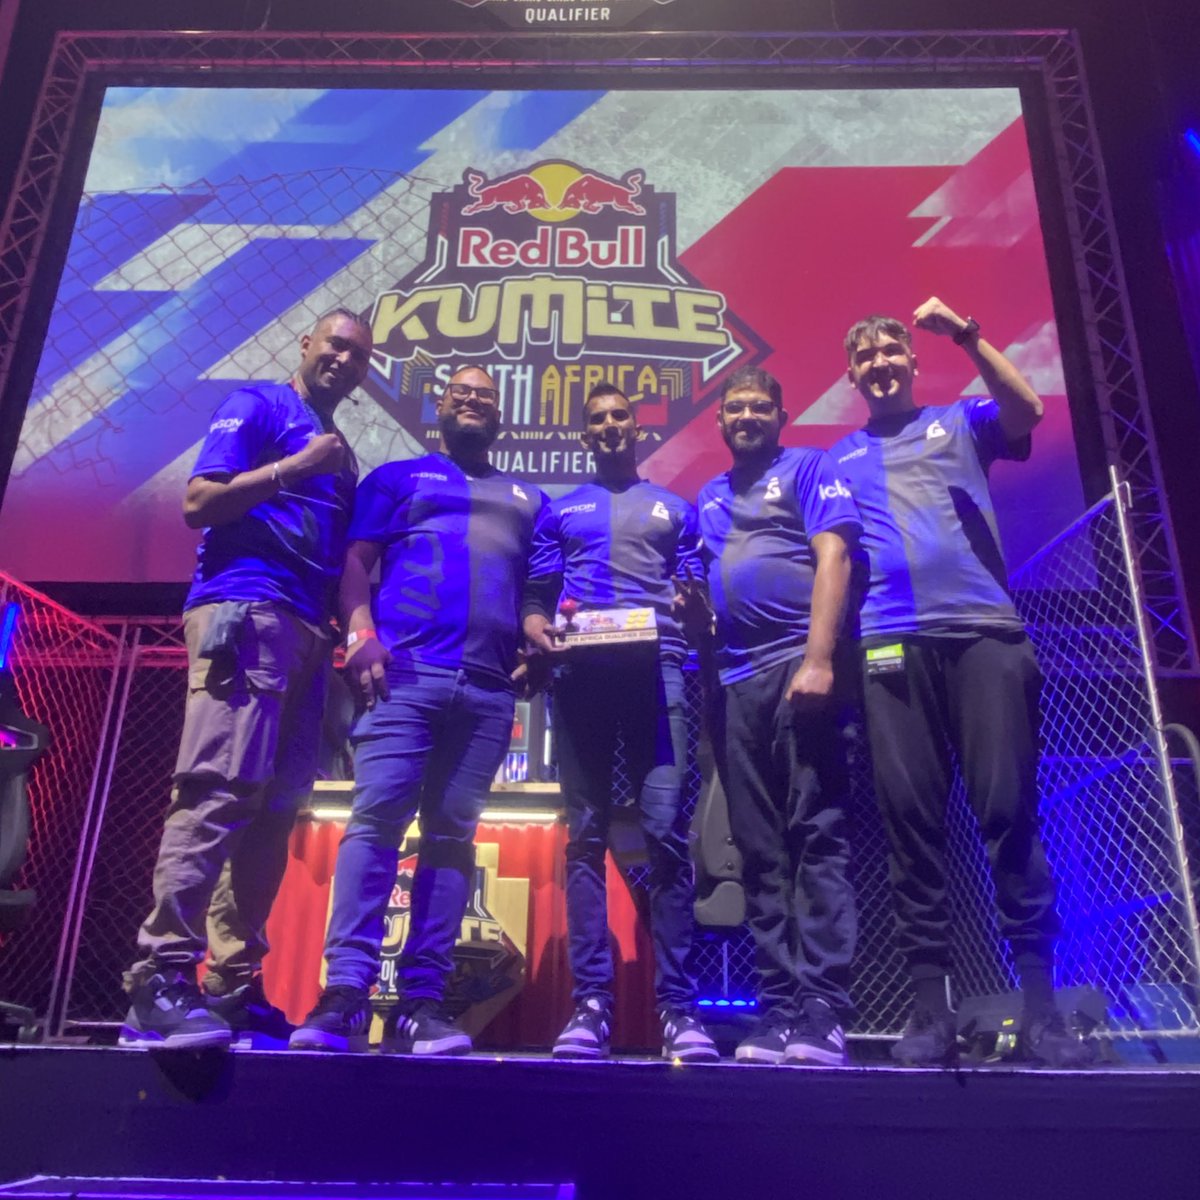 And that is that! @MarkTheShark92 is your Red Bull Kumite South African Qulifier winner 💪🏼

We will see you in Paris next year @redbullgaming 😏🔥

@ComicConAfrica @ComicConCPT @RedBullZA  #IllusionGG #FGCAfrica

Proudly Sponsored By:
@agonbyaocapmea @IclixSA